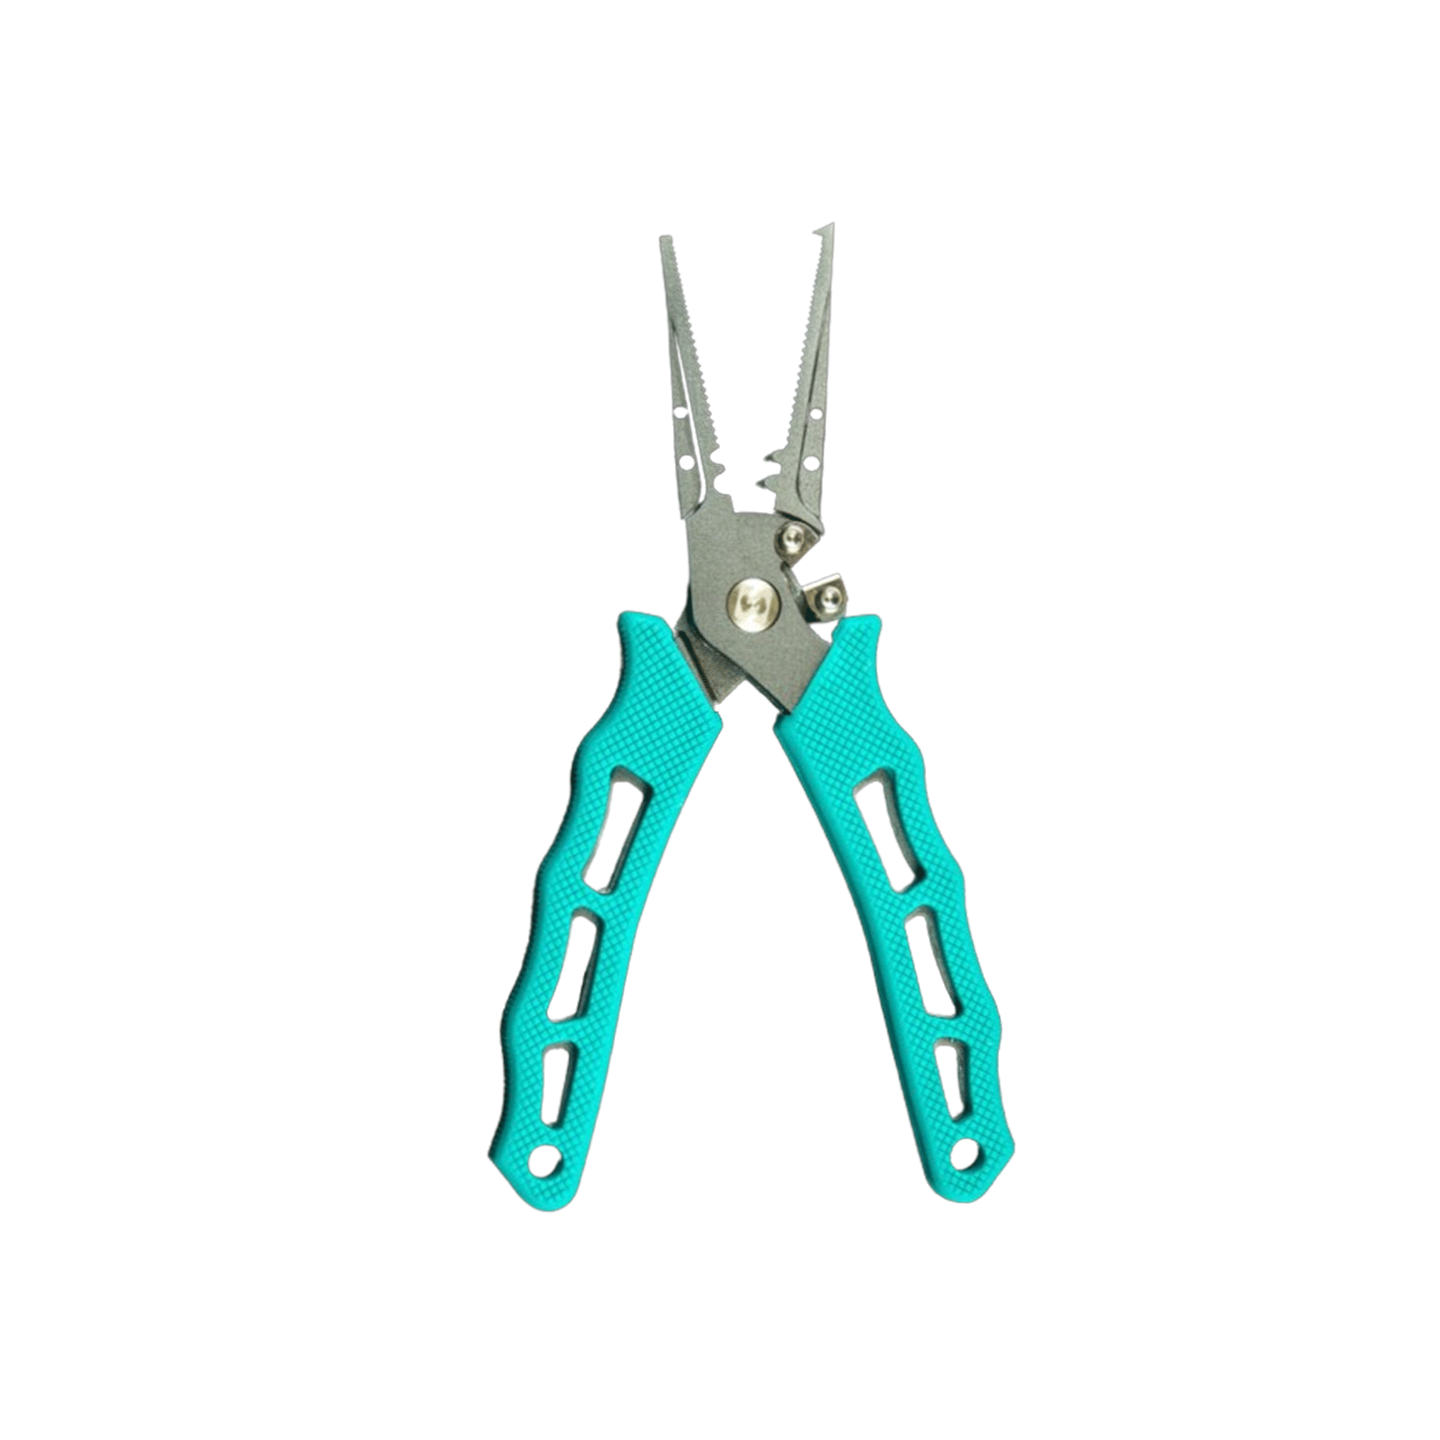 SENSATION STAINLESS STEEL FORGED MULTI-FUNCTION PLIERS 7''